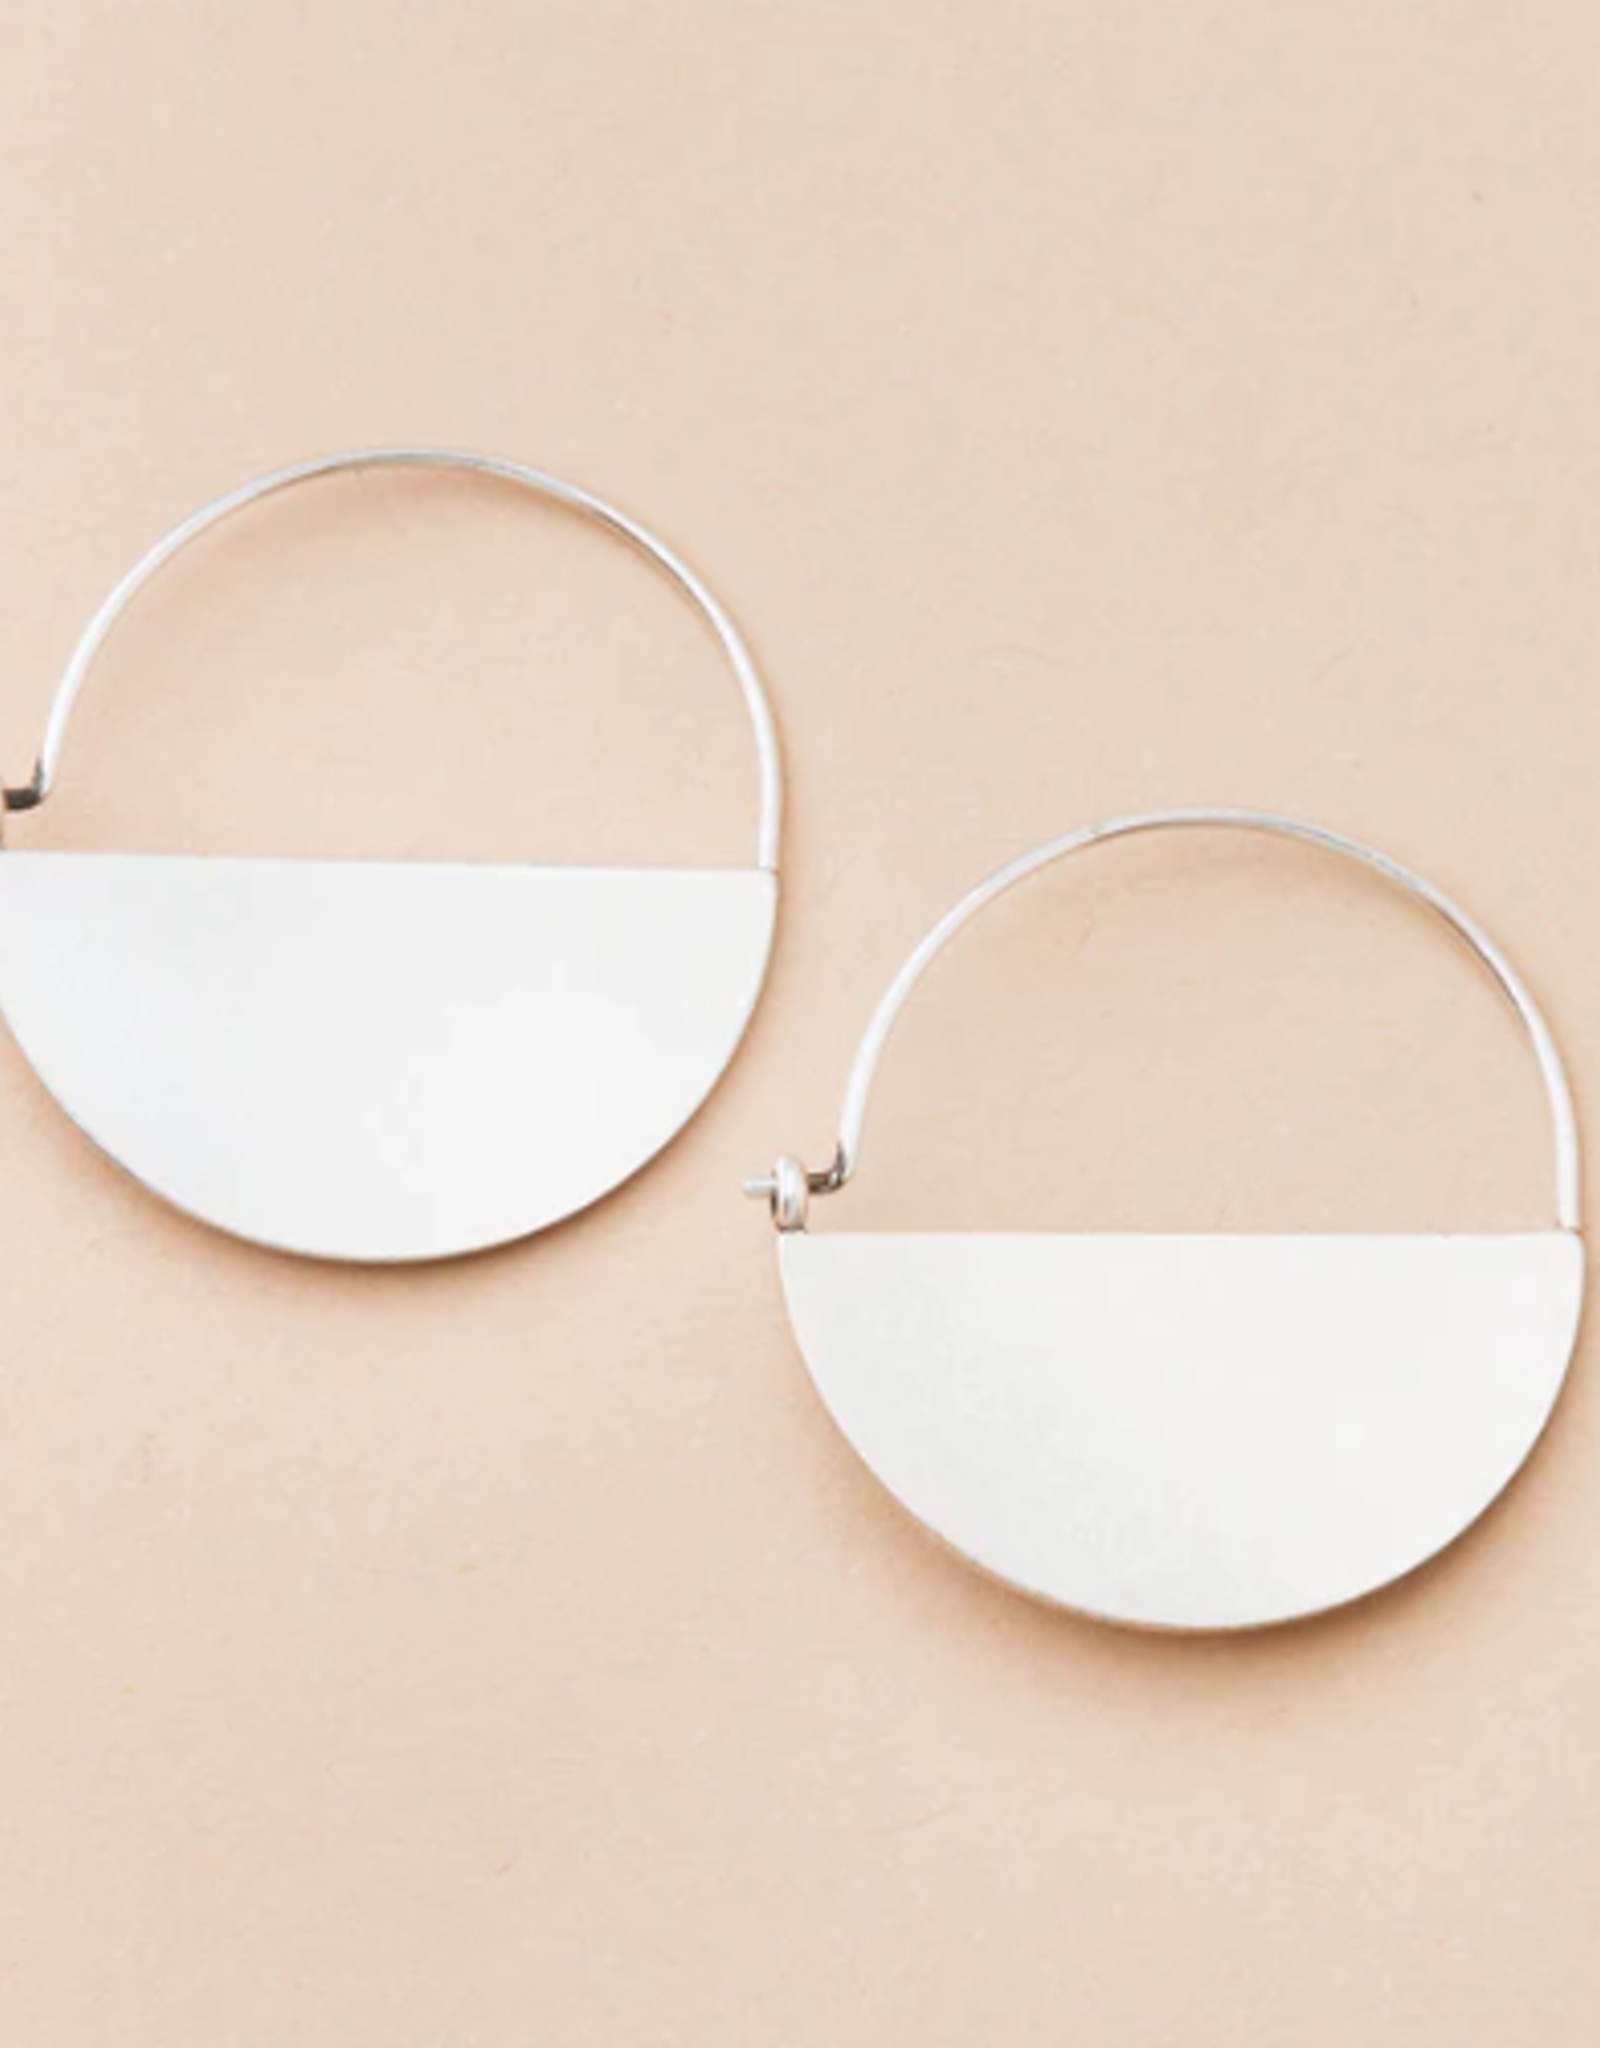 Scout Curated Refined Earring Lunar Hoop Silver